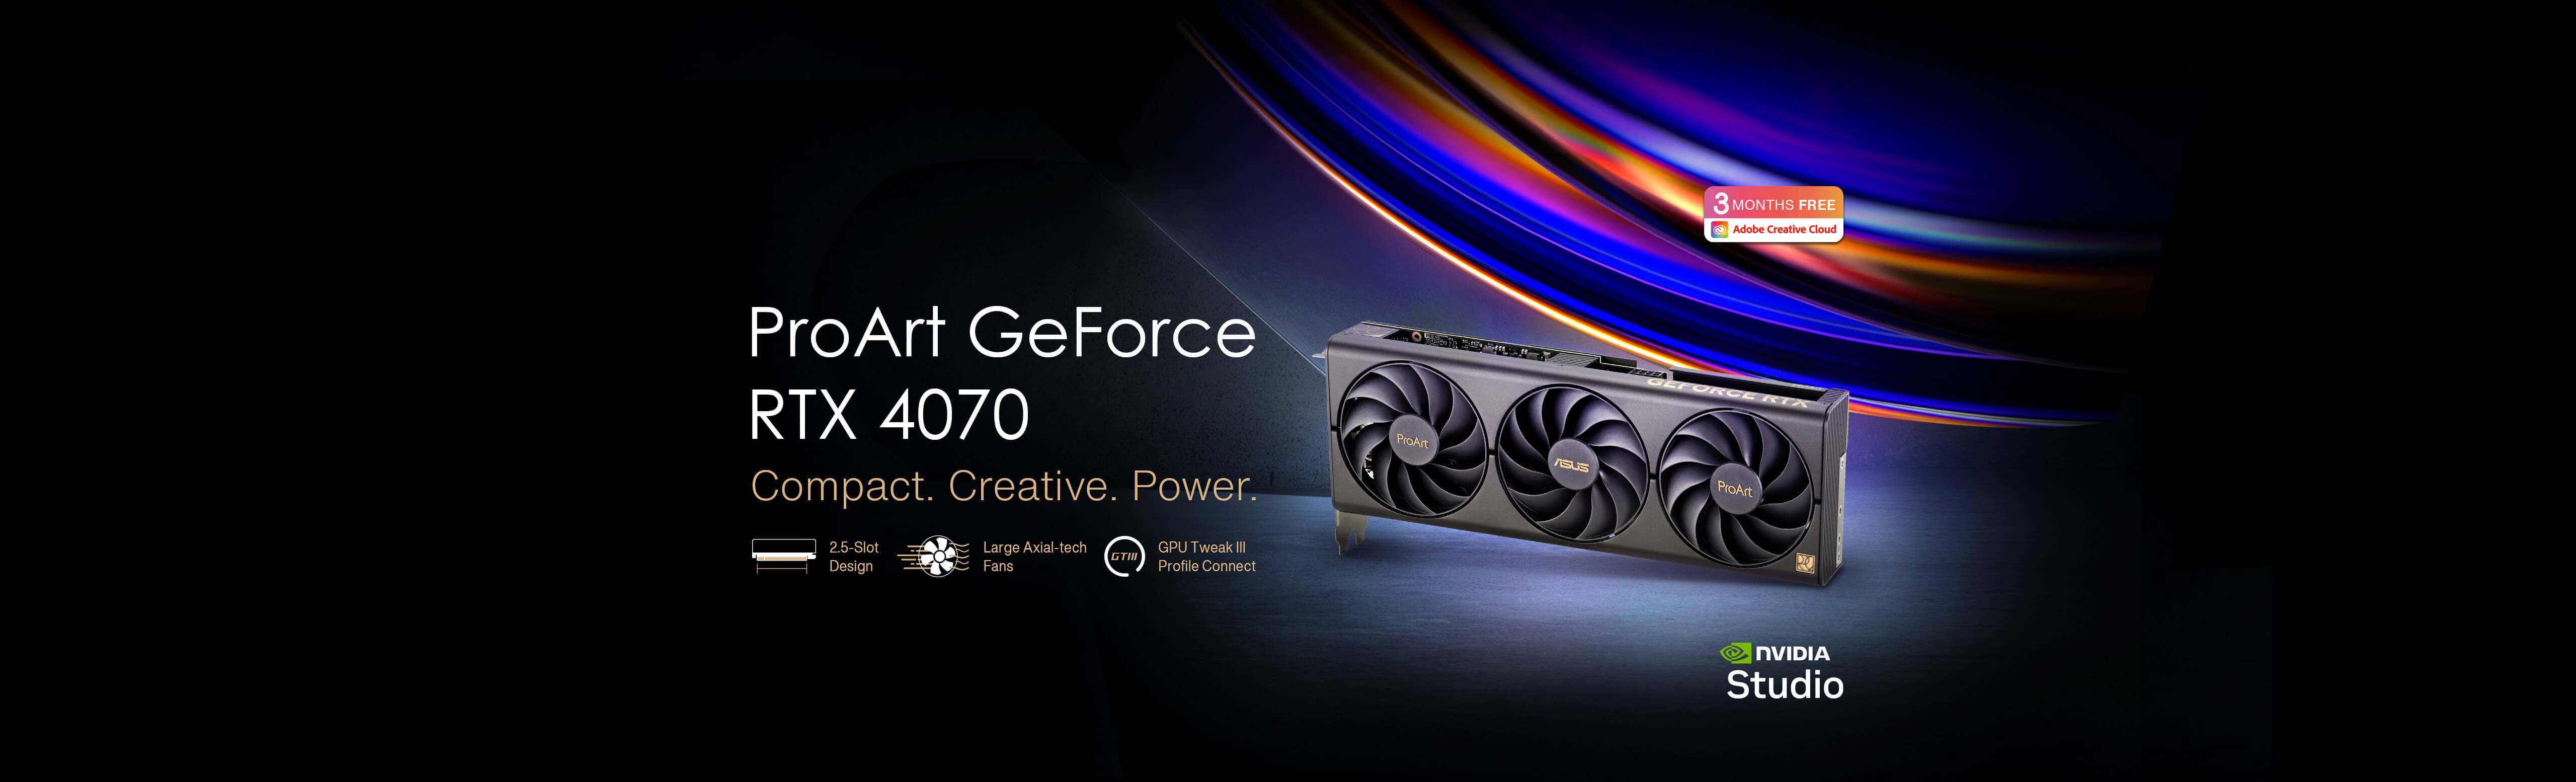 ASUS ProArt GeForce RTX™ 4070 graphics card standing on a raw concreate floor with Adobe Creative Cloud and NVIDIA Studio’s logos